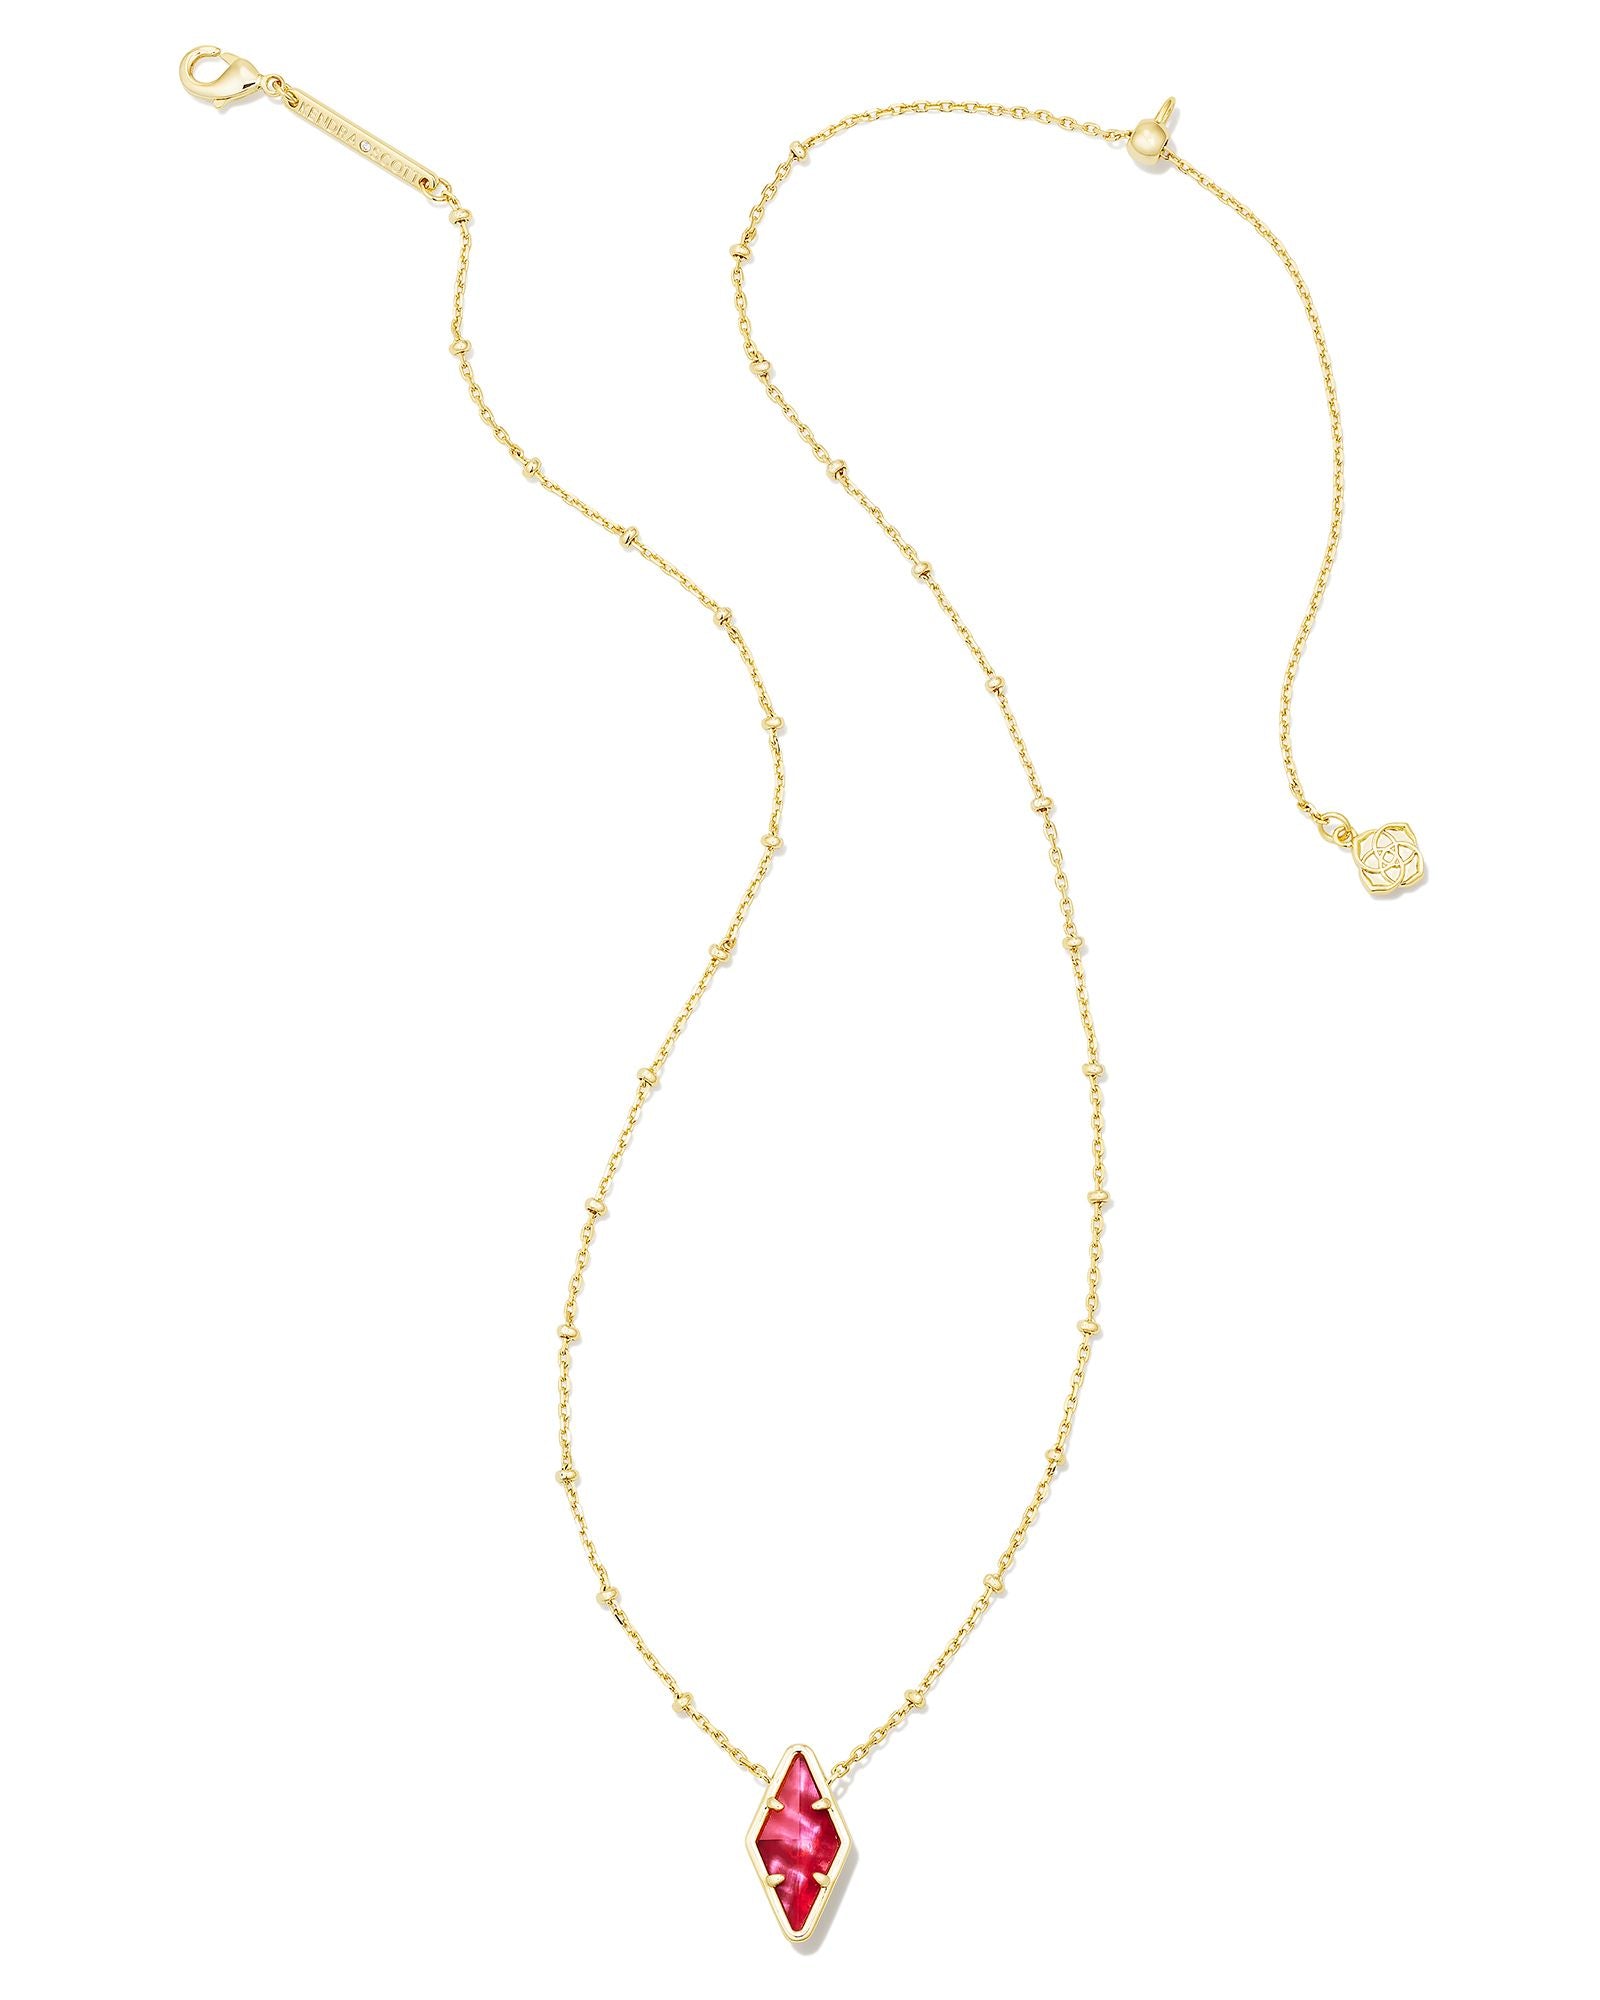 Kendra Scott | Kinsley Gold Short Pendant Necklace in Raspberry Illusion - Giddy Up Glamour Boutique